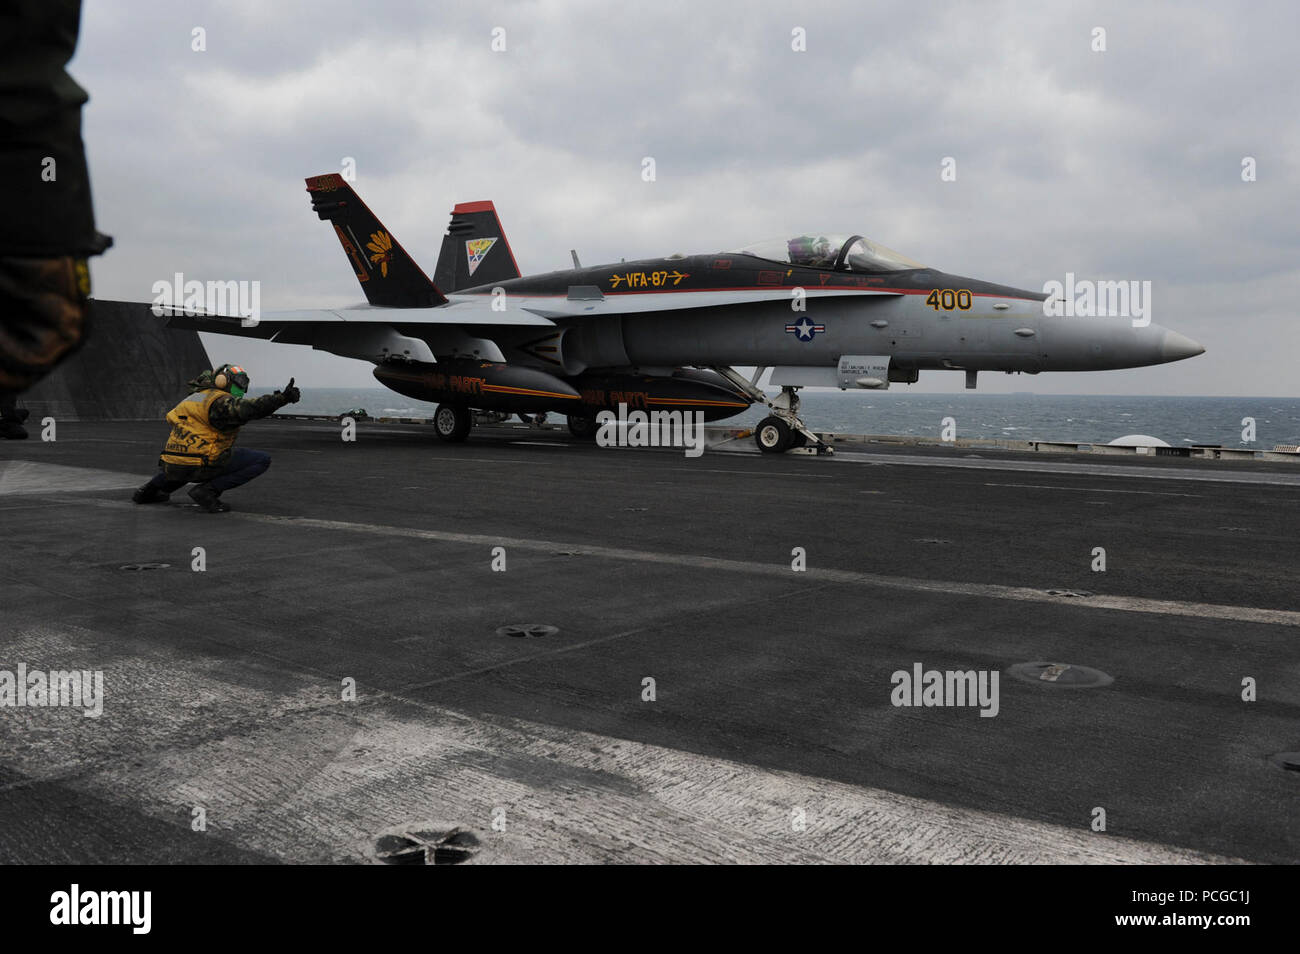 Capt. Daniel Martin, assigned to the “Golden Warriors” of Strike Fighter Squadron (VFA) 87, launches from the  flight deck of the aircraft carrier USS George H.W. Bush (CVN 77) in an F/A-18C Hornet. George H.W. Bush is returning to its homeport in Norfolk, Va., after completing a deployment to the U.S. 6th and 5th Fleet Area of Operations (AOO) in support of U.S. national security interests. The deployment is part of a regular rotation of forces to support maritime security operations and theater security efforts. Stock Photo